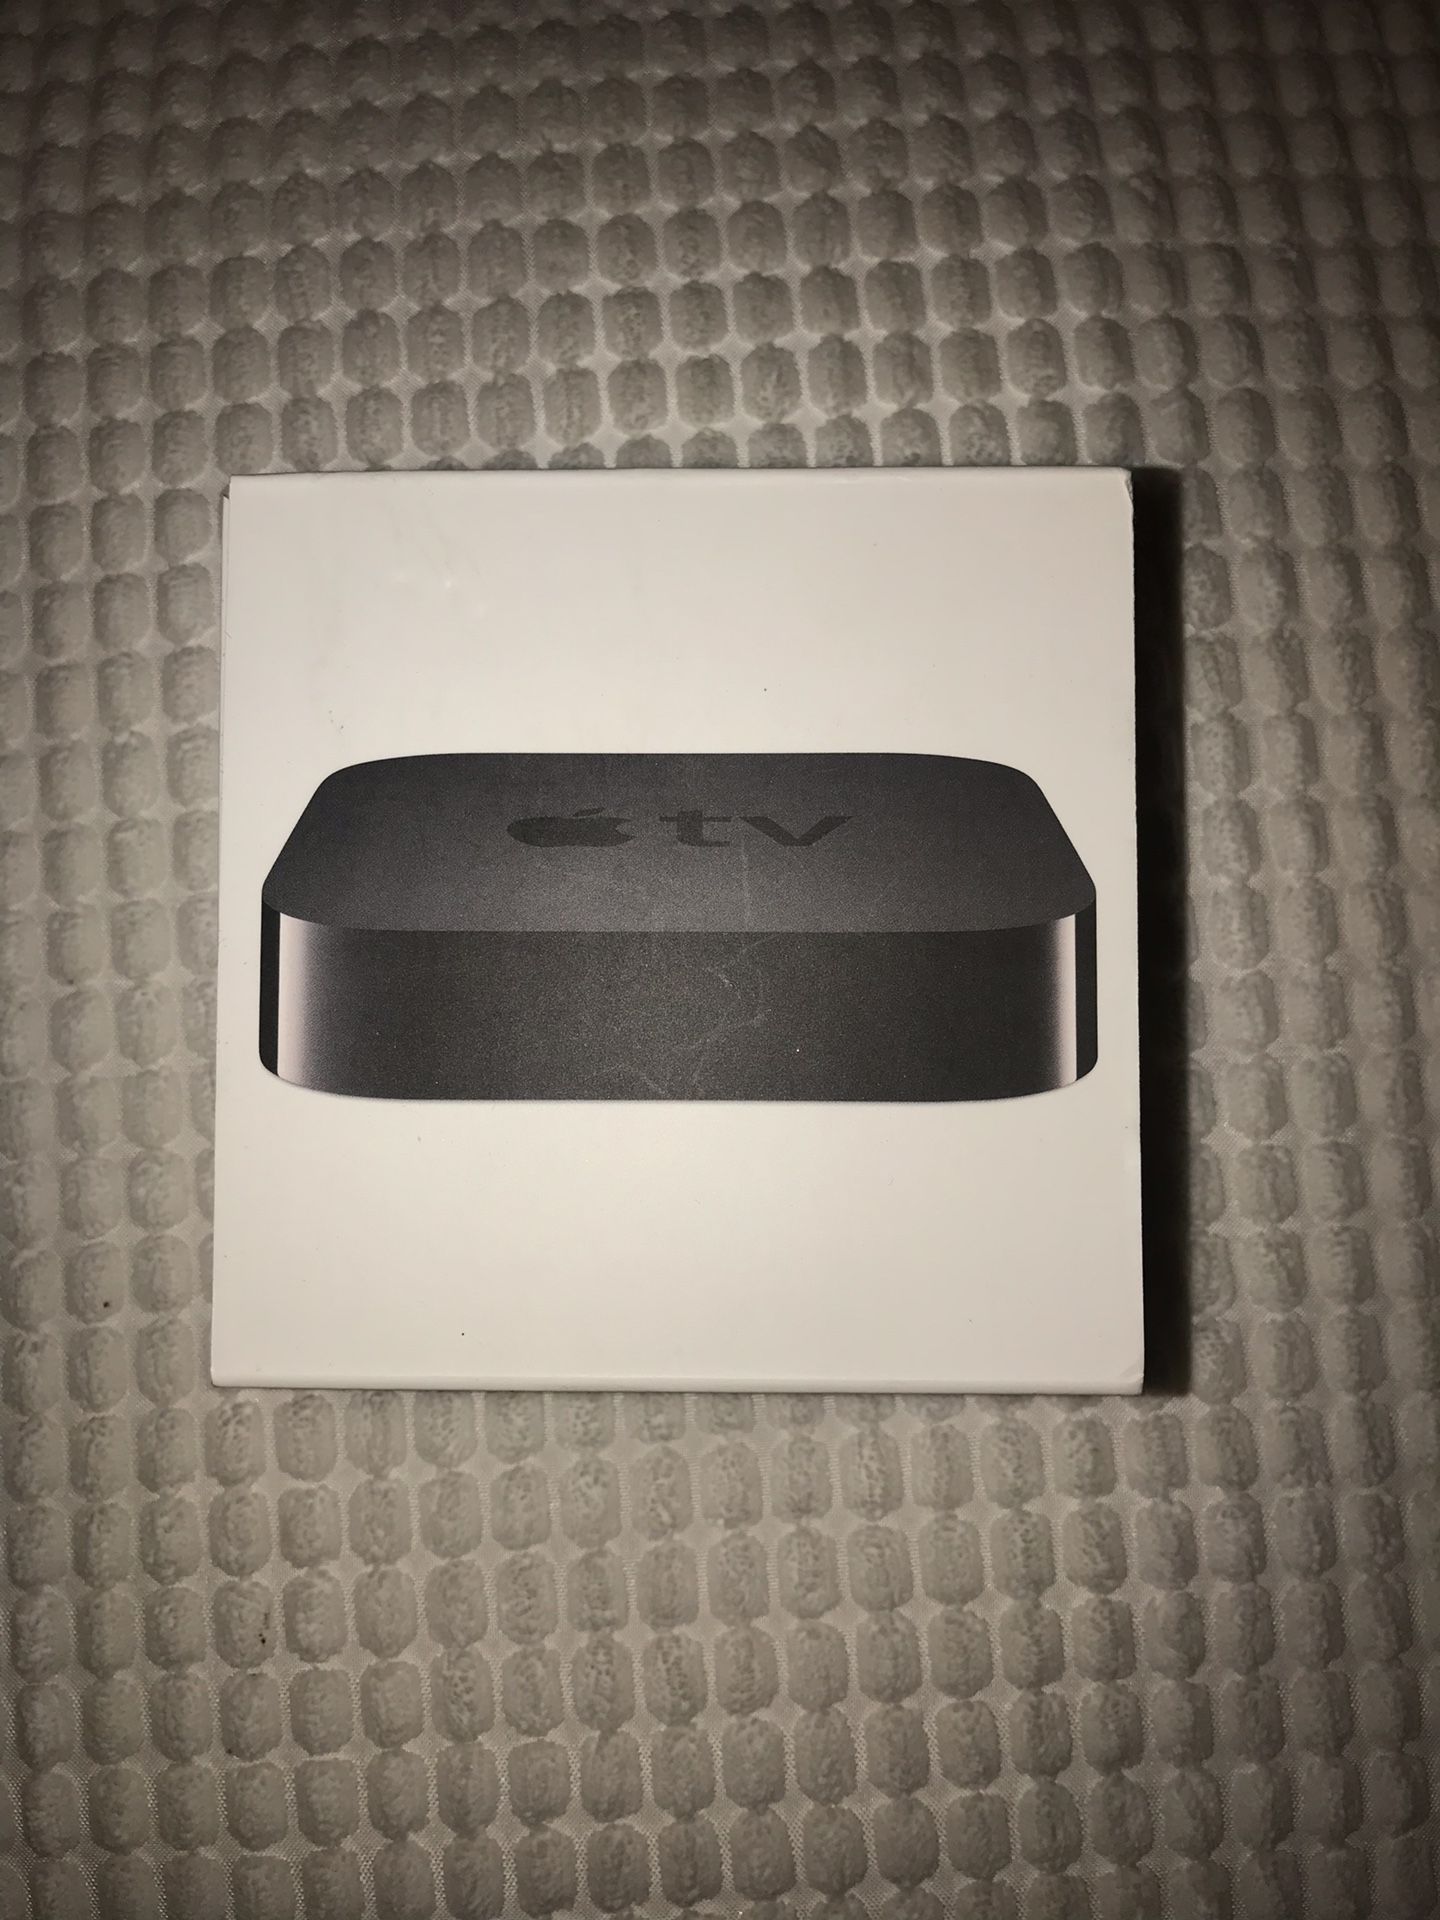 Apple TV 3rd generation with remote and cables